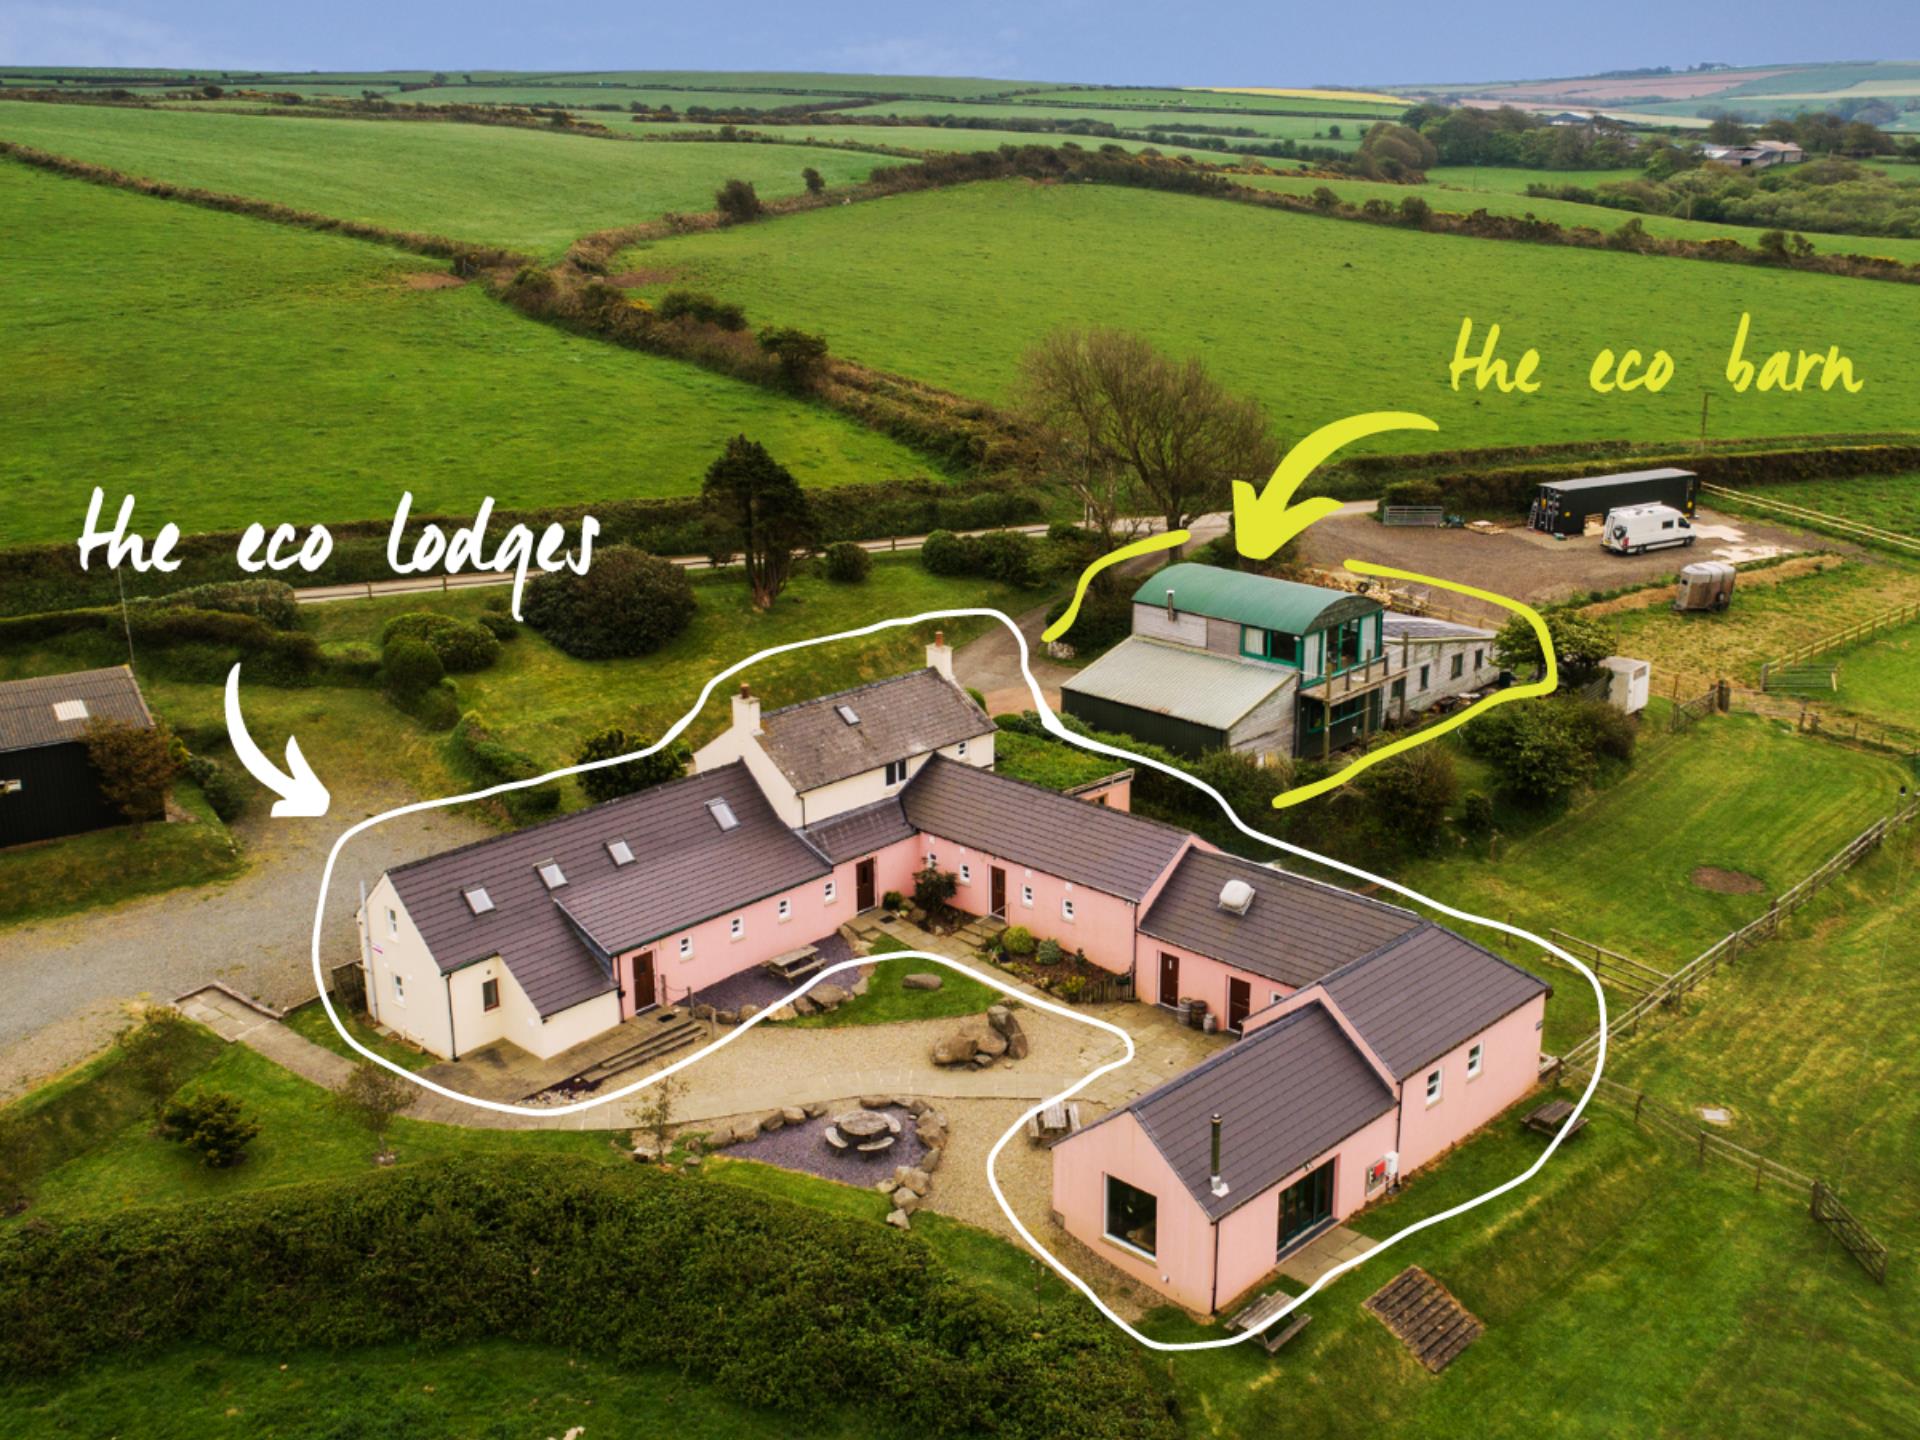 Aerial view of eco lodges and eco barn